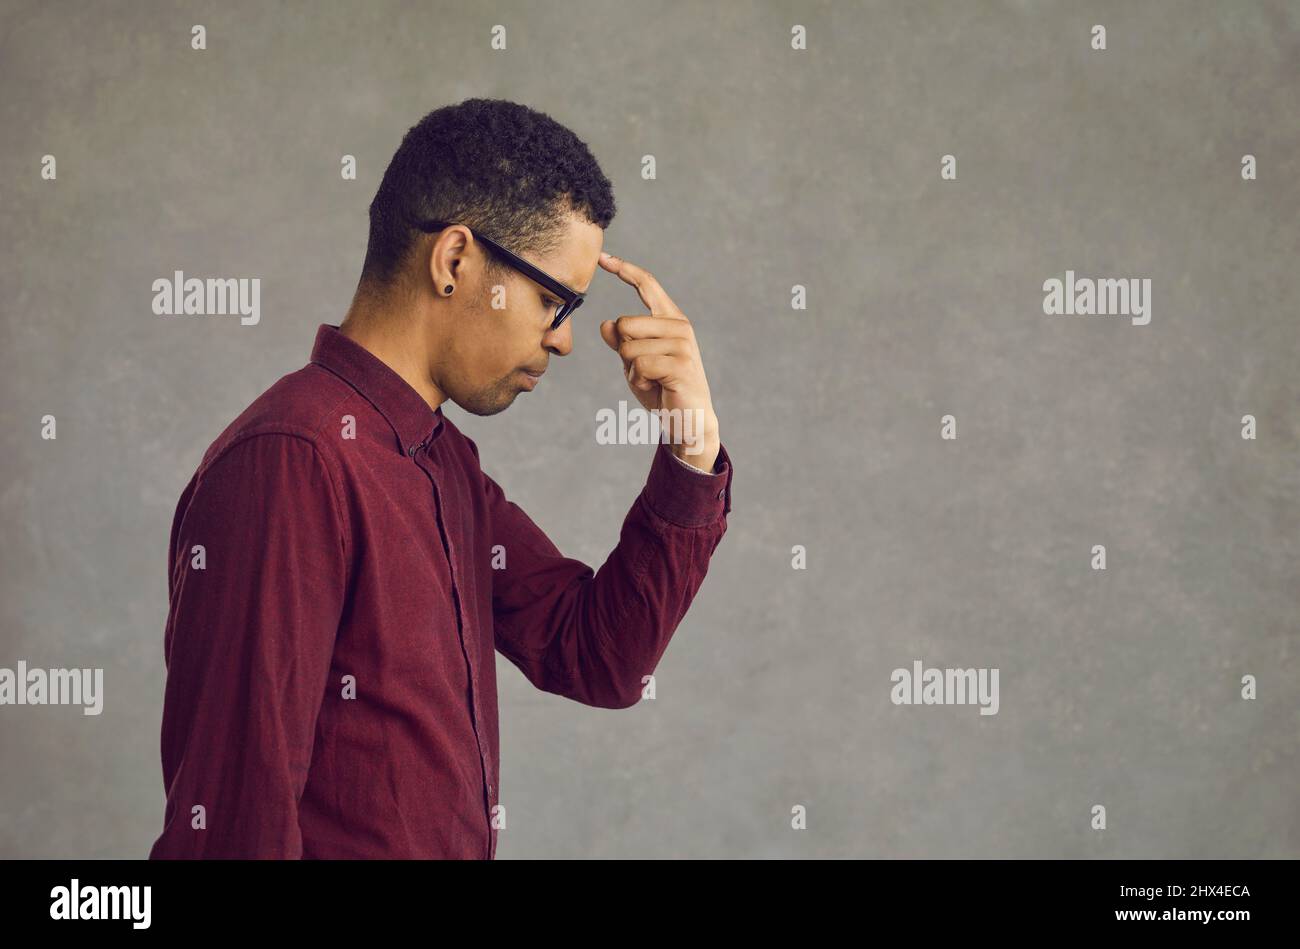 Young african american man thinking put finger to forehead studio portrait Stock Photo